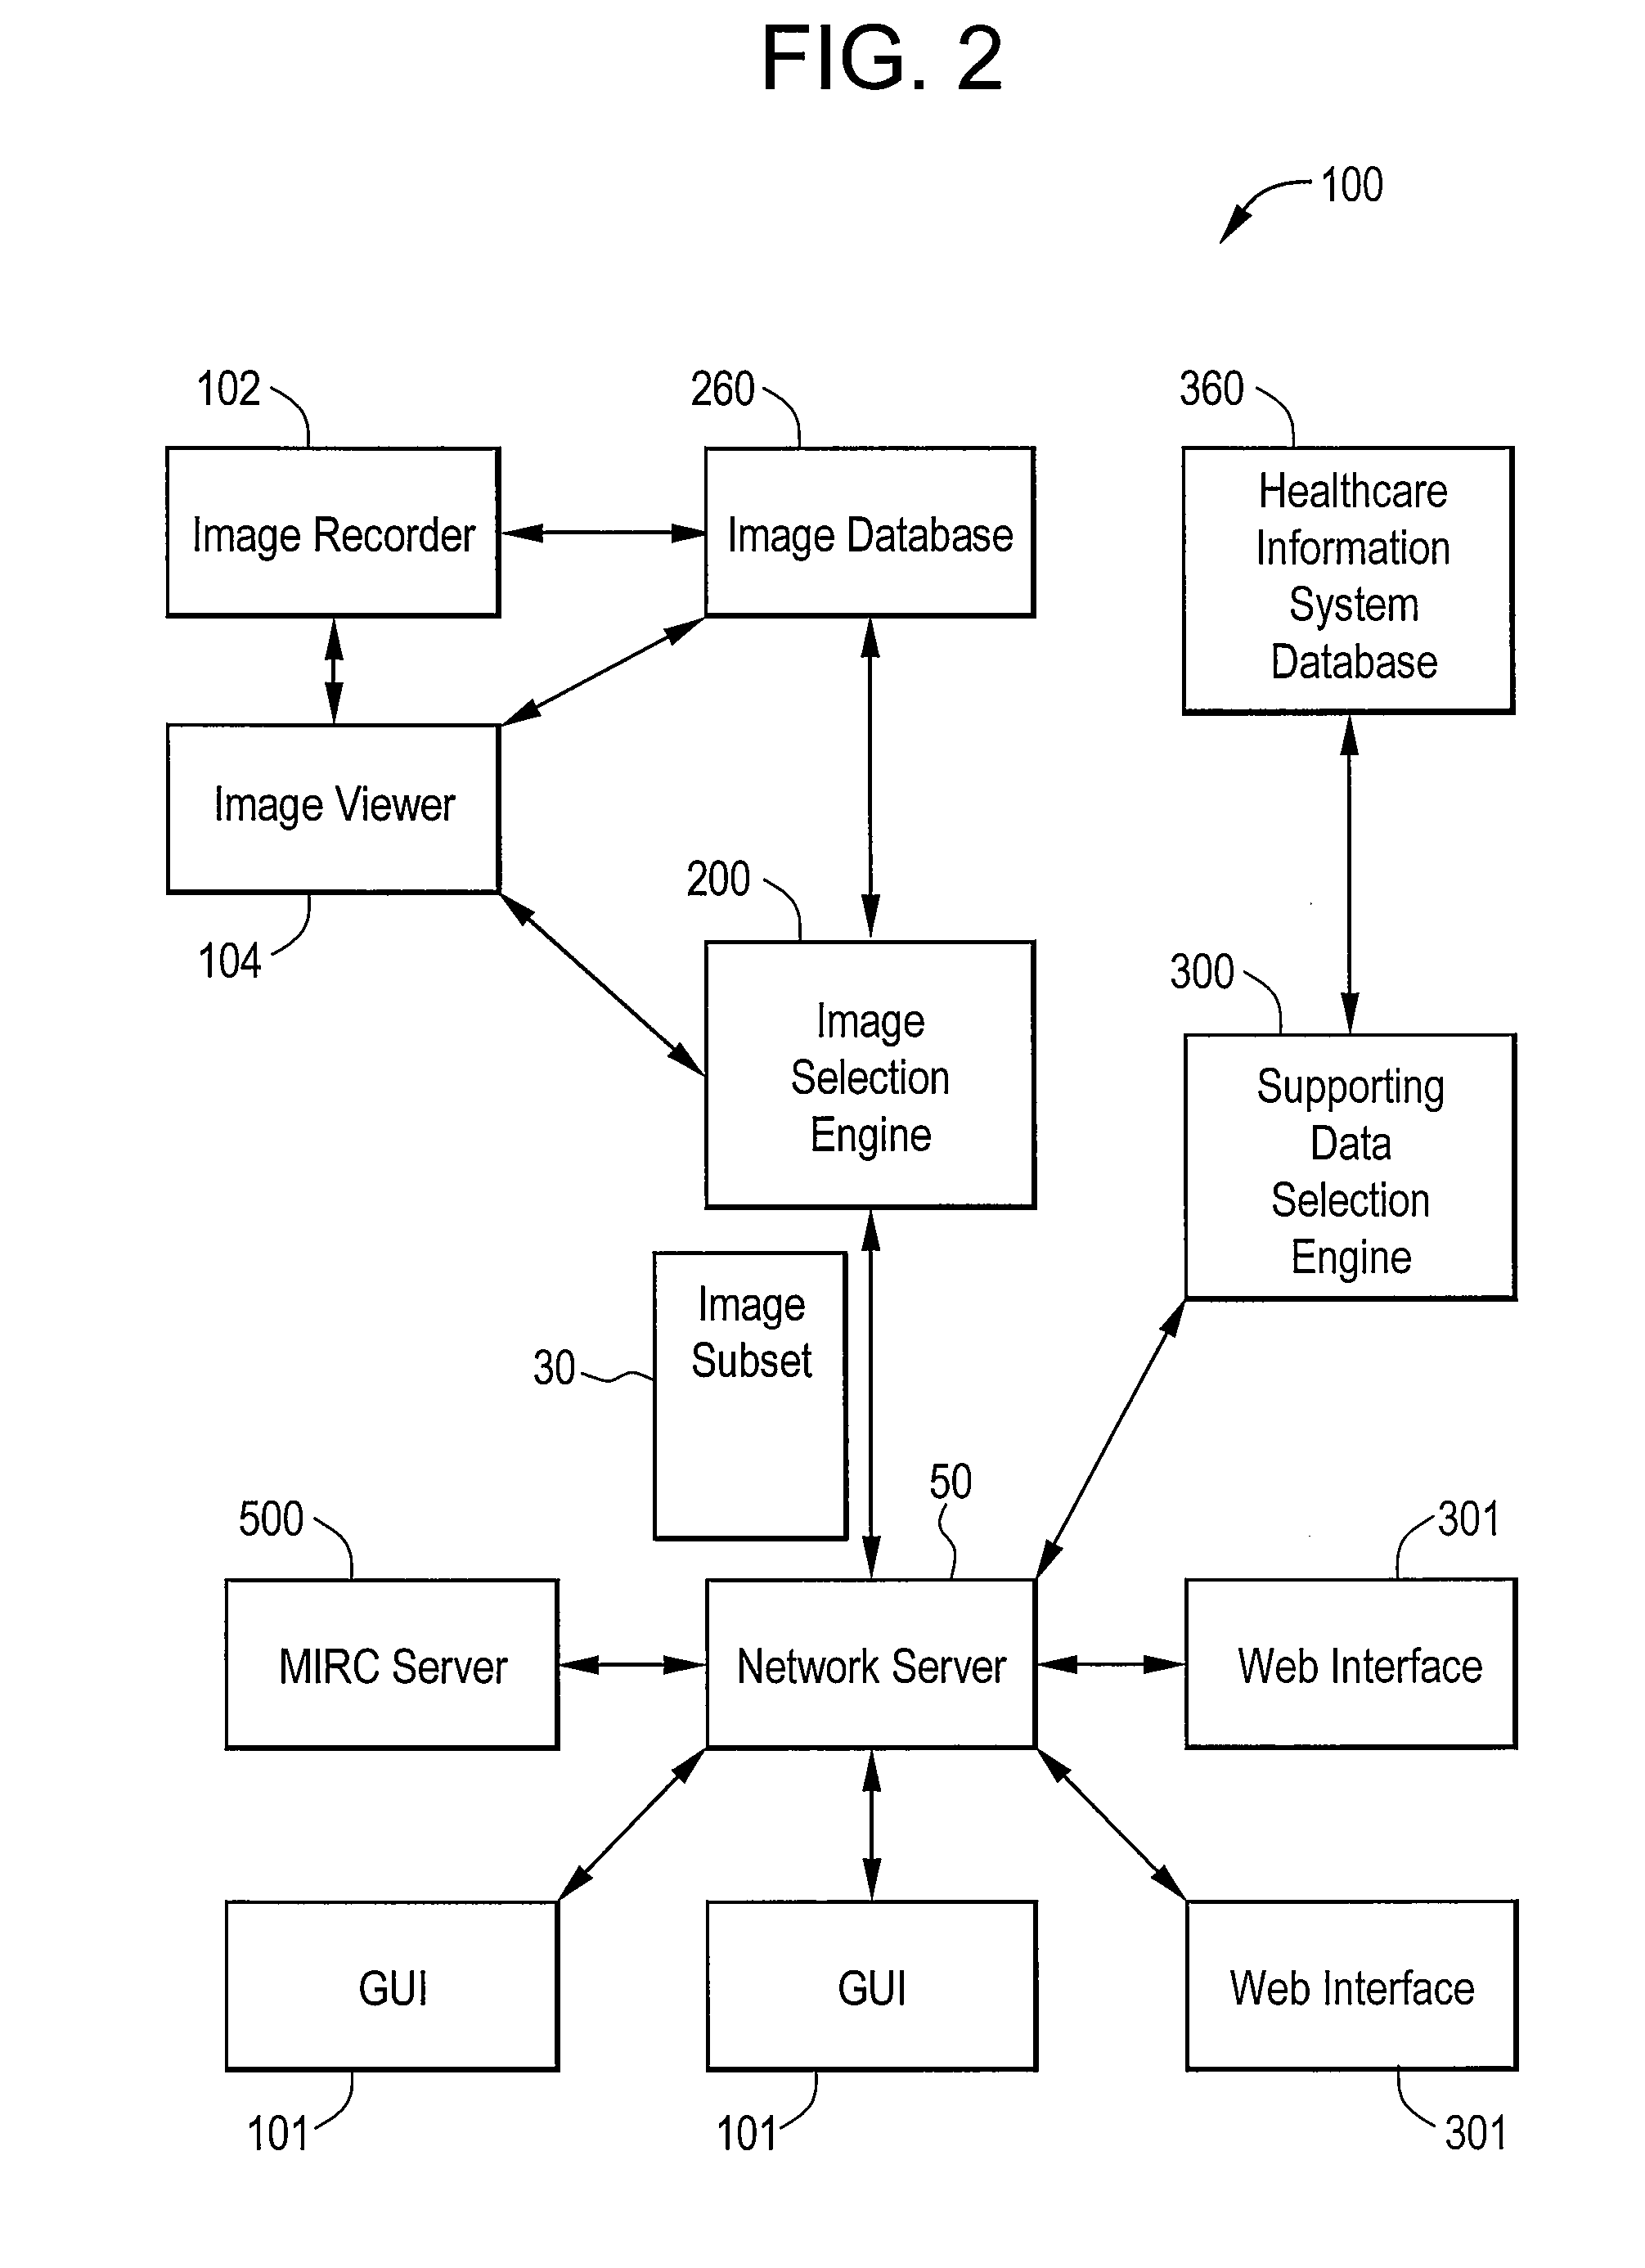 Systems and methods for generating a teaching file message